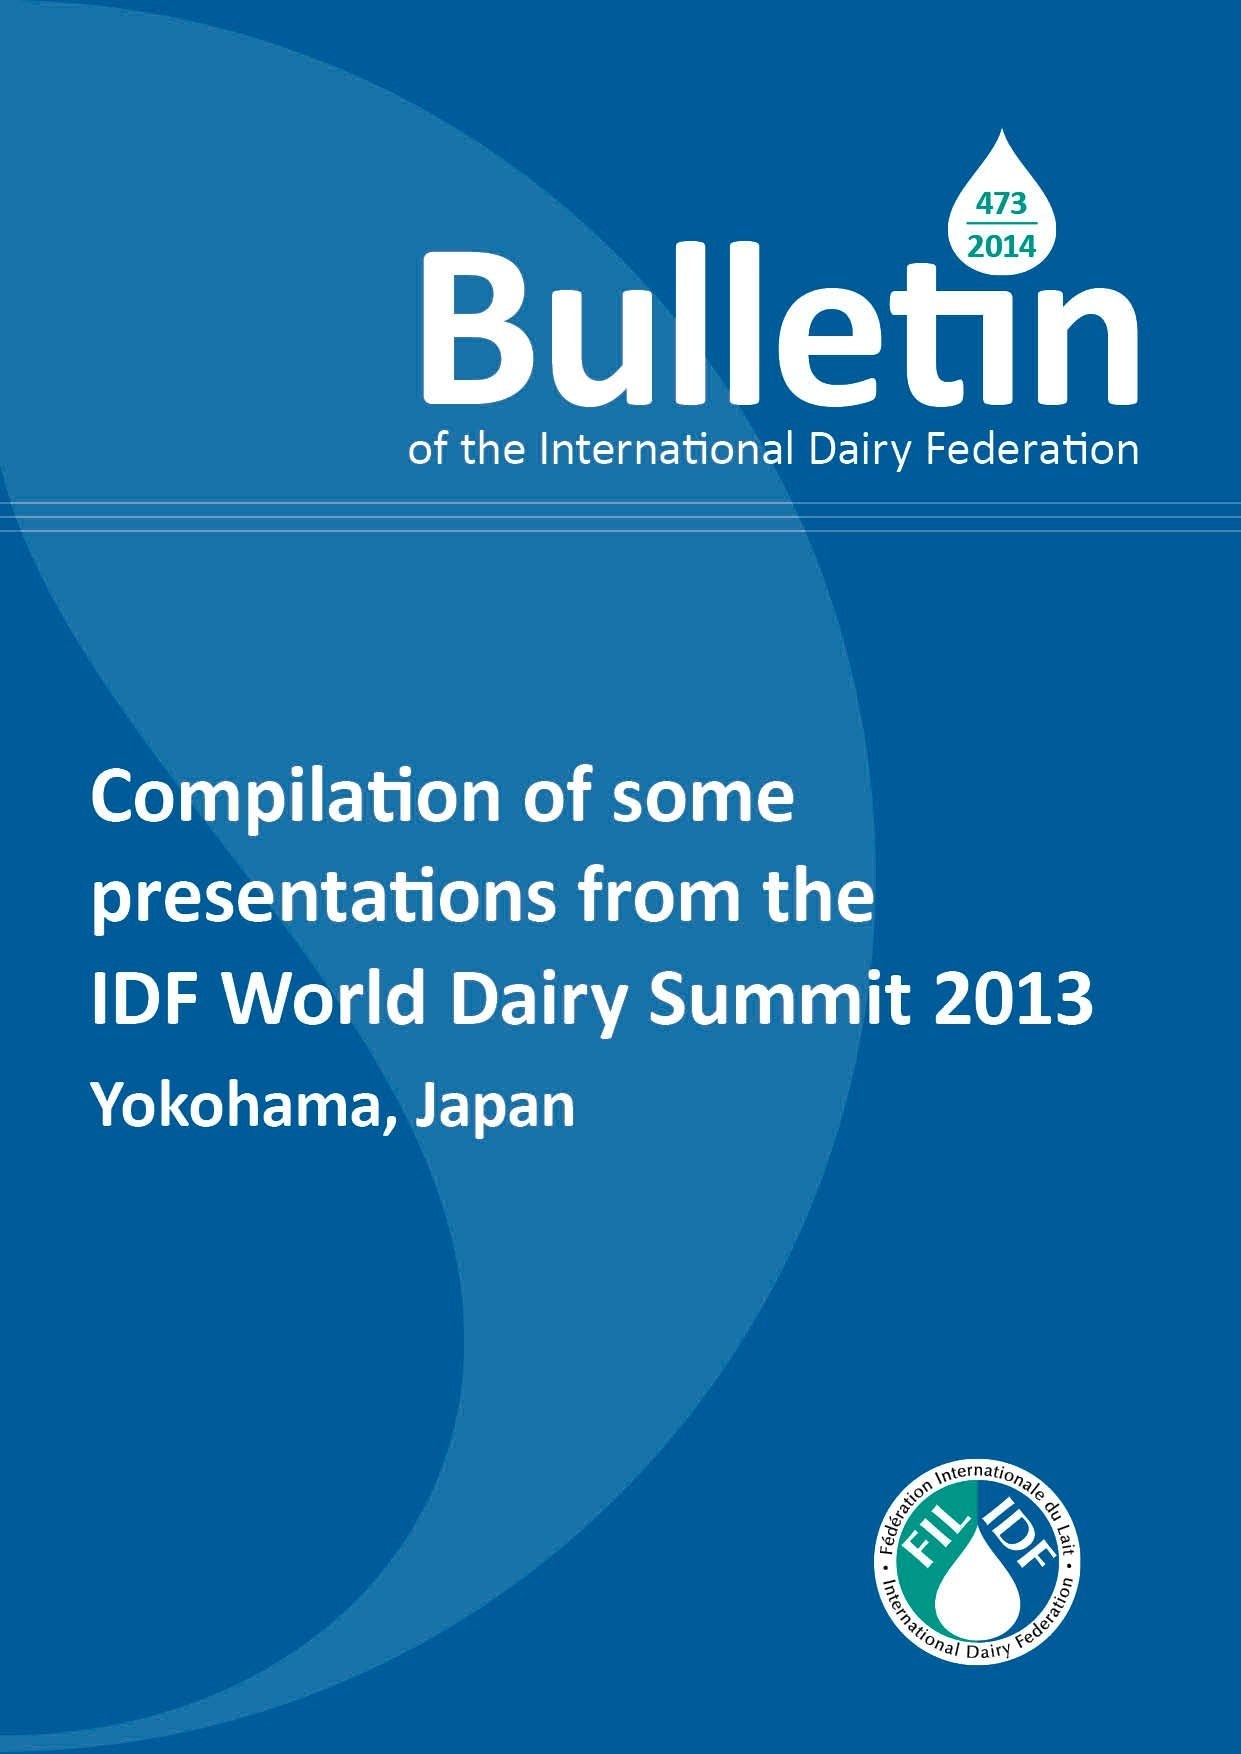 Bulletin of the IDF N° 473/ 2014: Compilation of some presentations from the IDF World Dairy Summit 2013 - FIL-IDF